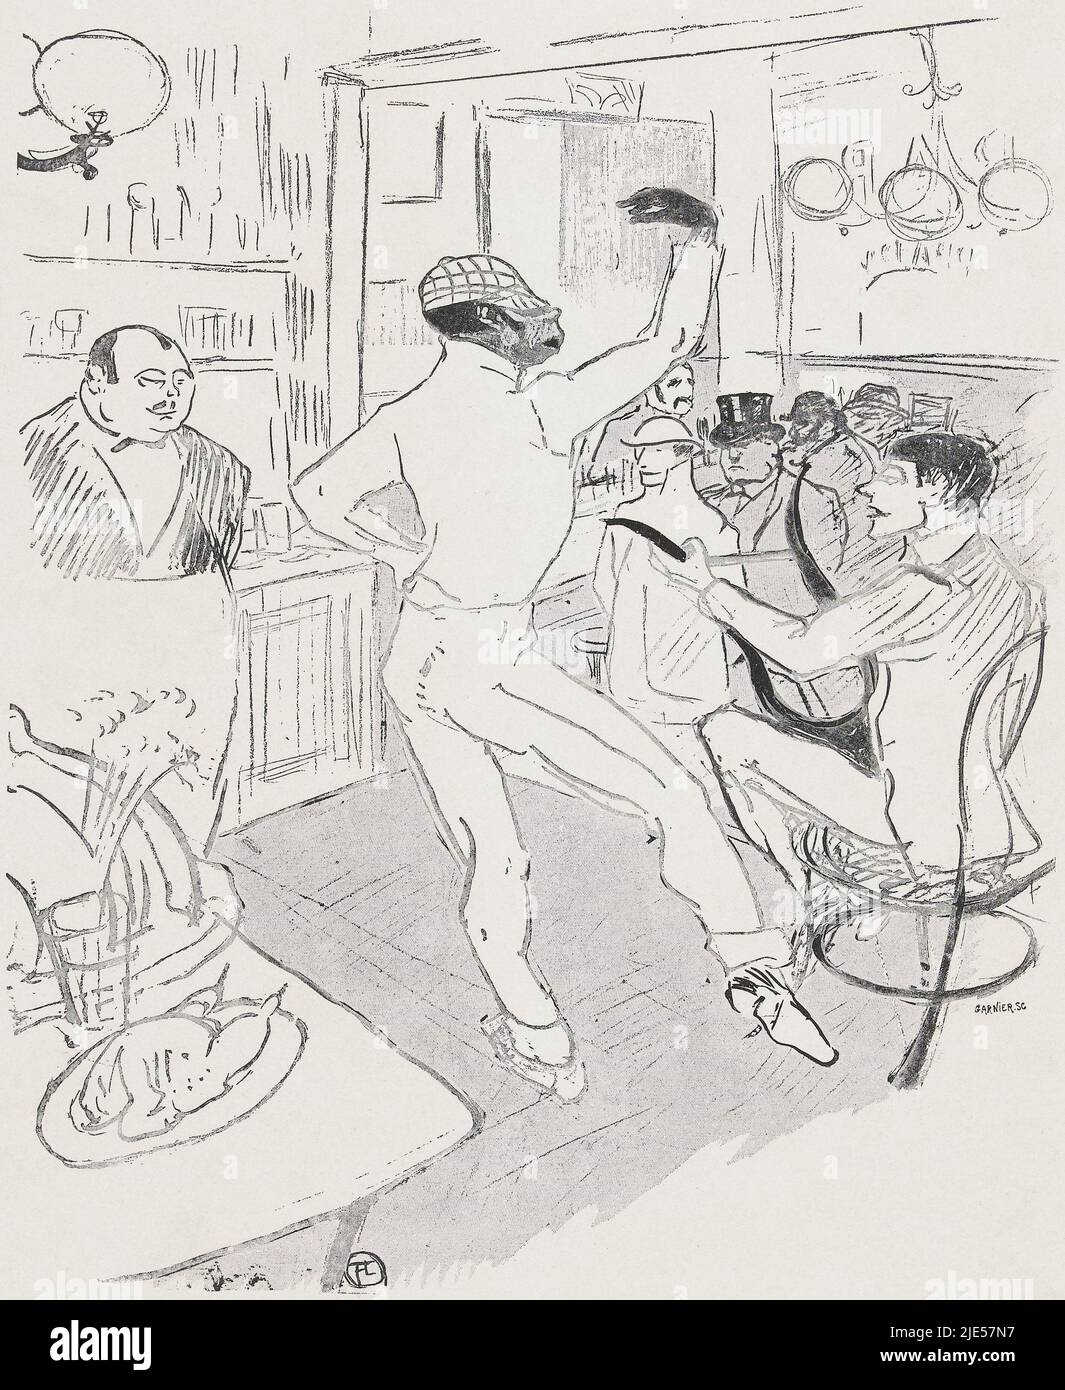 Portrait of the black clown Rafael Padilla, who performed under the stage name Chocolat, dancing in the so-called English Bar (Irish and American Bar) in Paris. He is accompanied musically by his partner, the clown George Footit. On the left the bartender is known as Ralph or Randolphe, Portrait of dancing black clown Chocolat in English Bar in Paris Chocolat dansant., intermediary draughtsman: Henri de Toulouse-Lautrec, (mentioned on object), printer: Auguste Garnier, (mentioned on object), publisher: Edouard Kleinmann, (mentioned on object), Paris, 1896, paper, h 240 mm × w 195 mm, h 384 mm Stock Photo